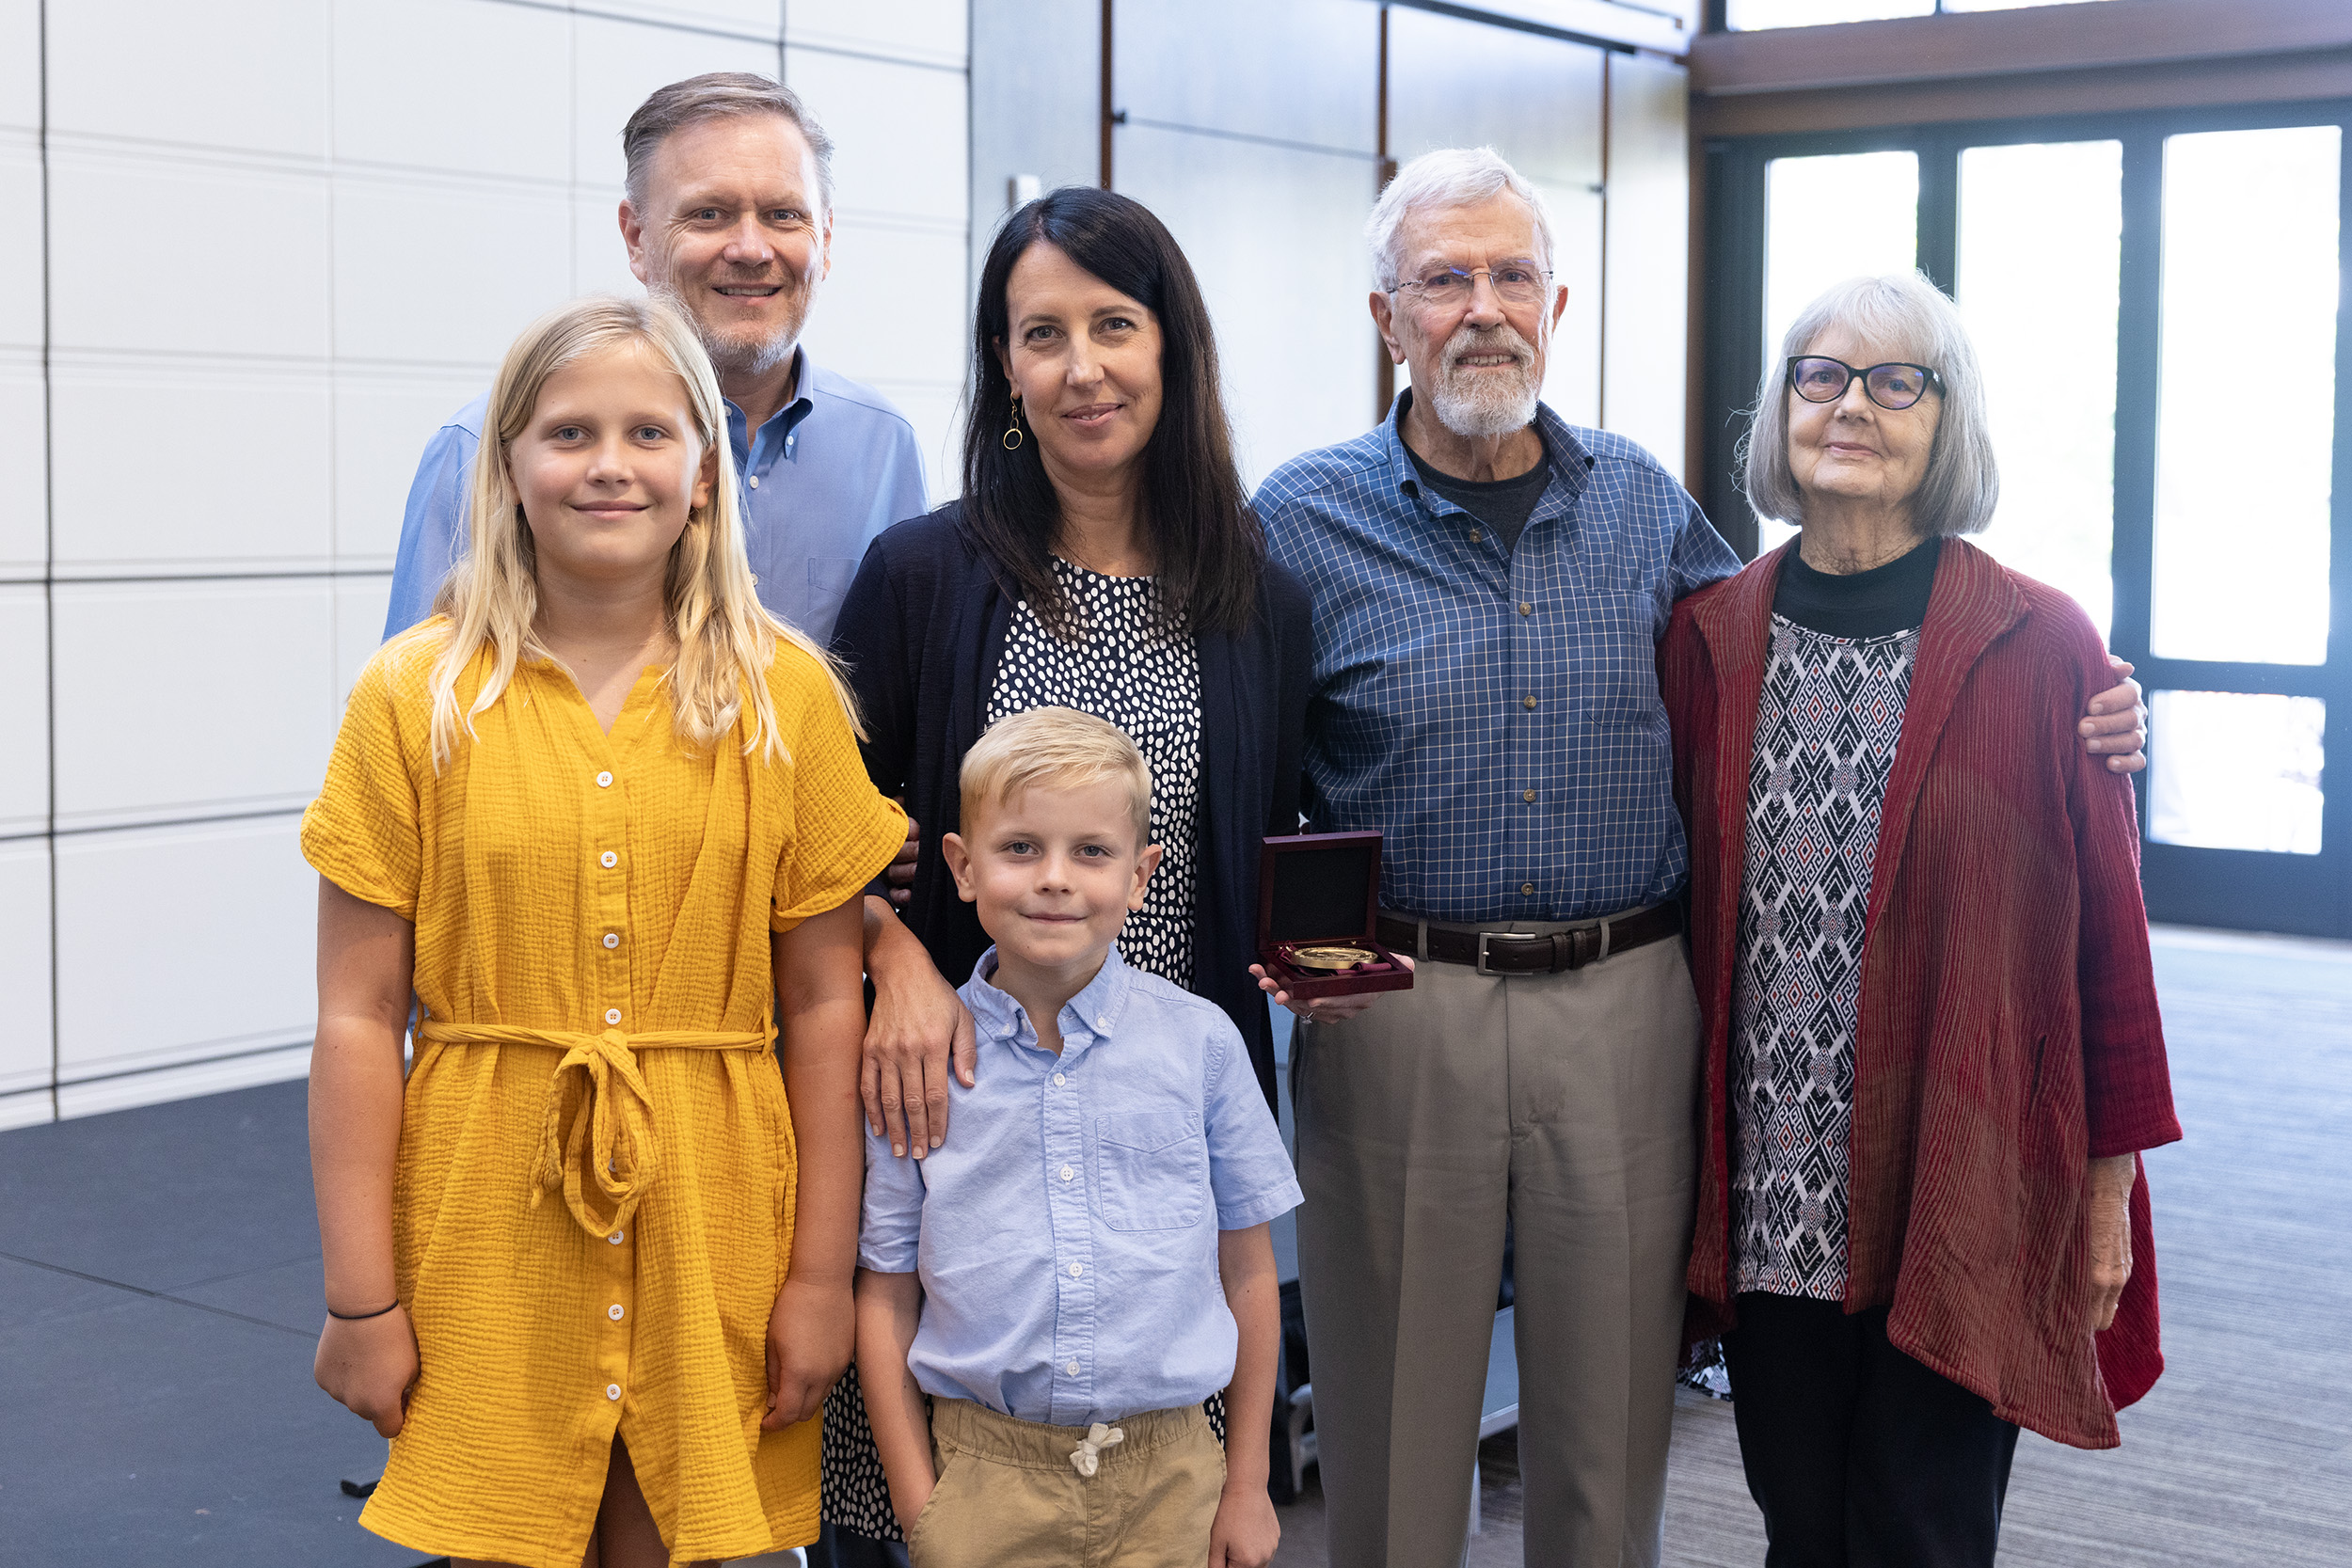 The family of Professor Shanna Rose joined her installation ceremony.